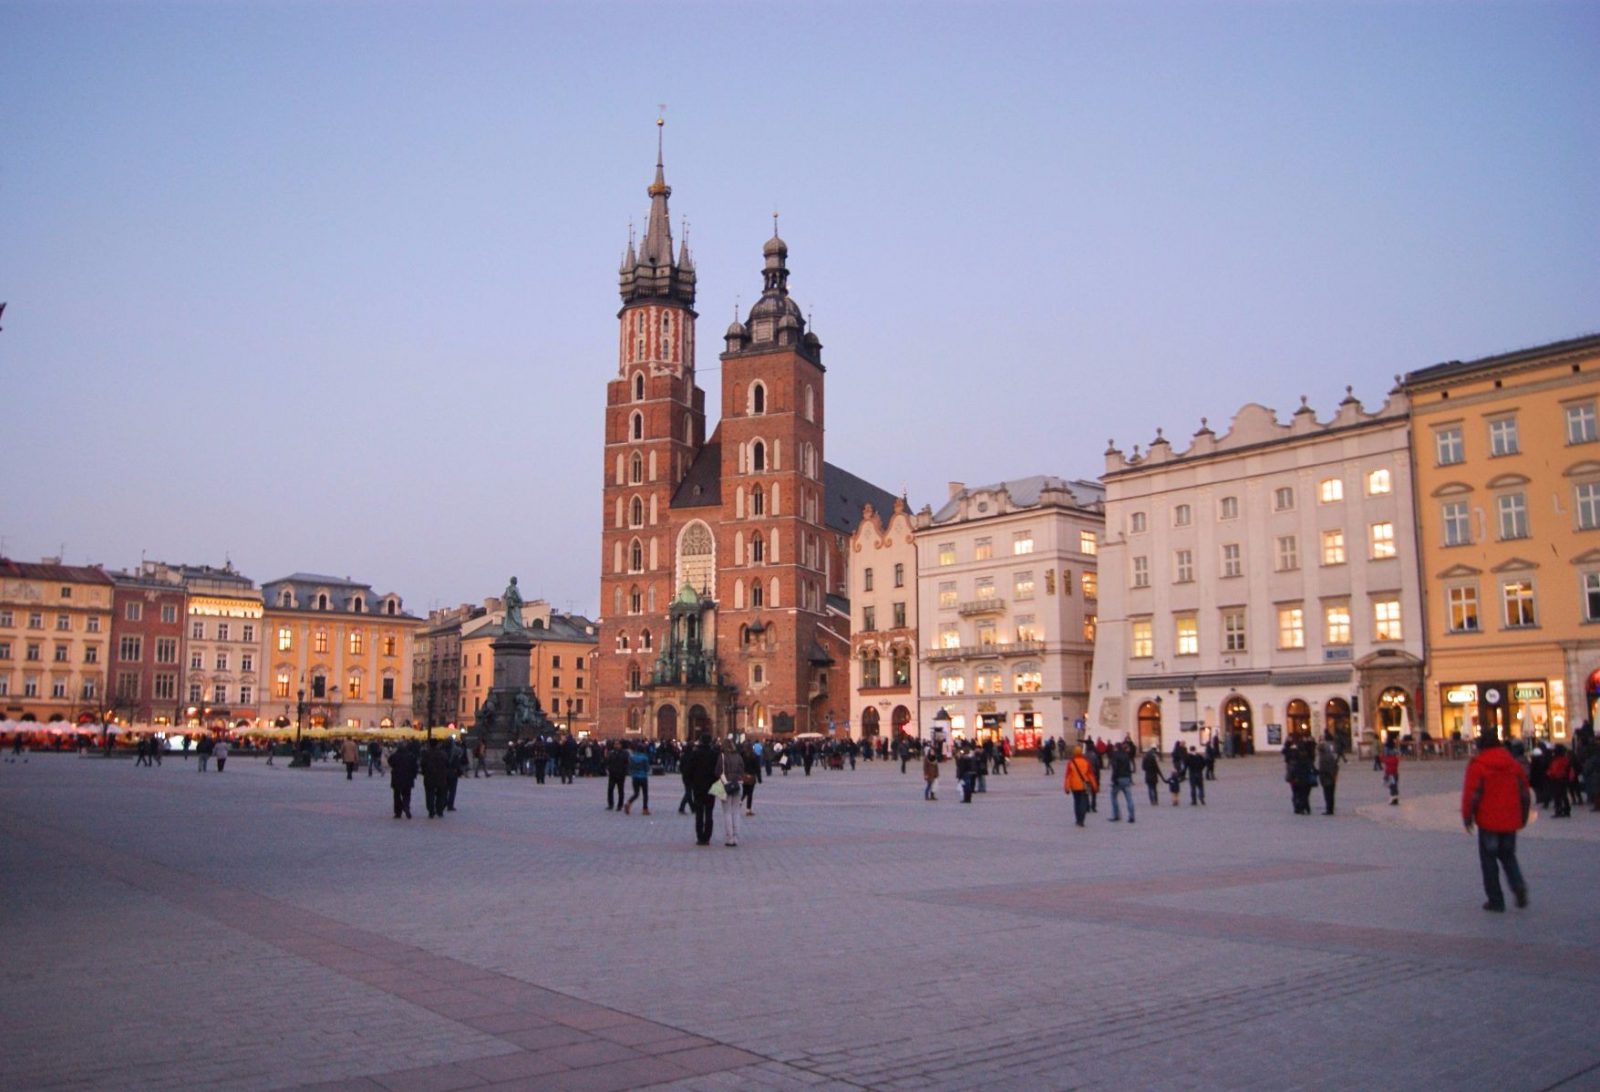 The Old Town in Krakow